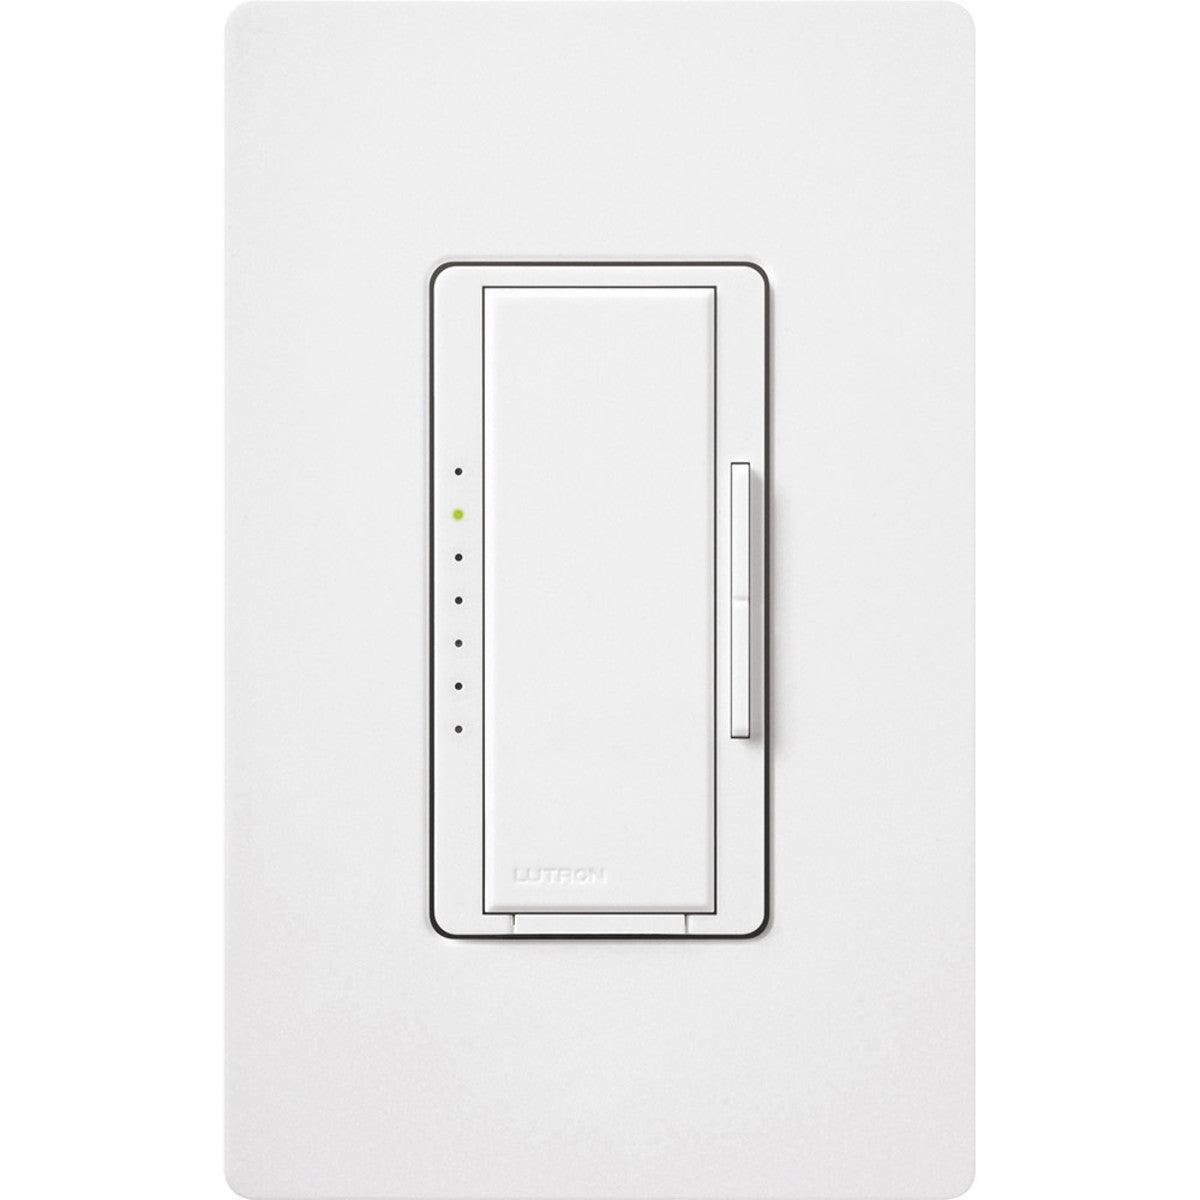 Lutron Maestro Dimmer Switches and Light Switches